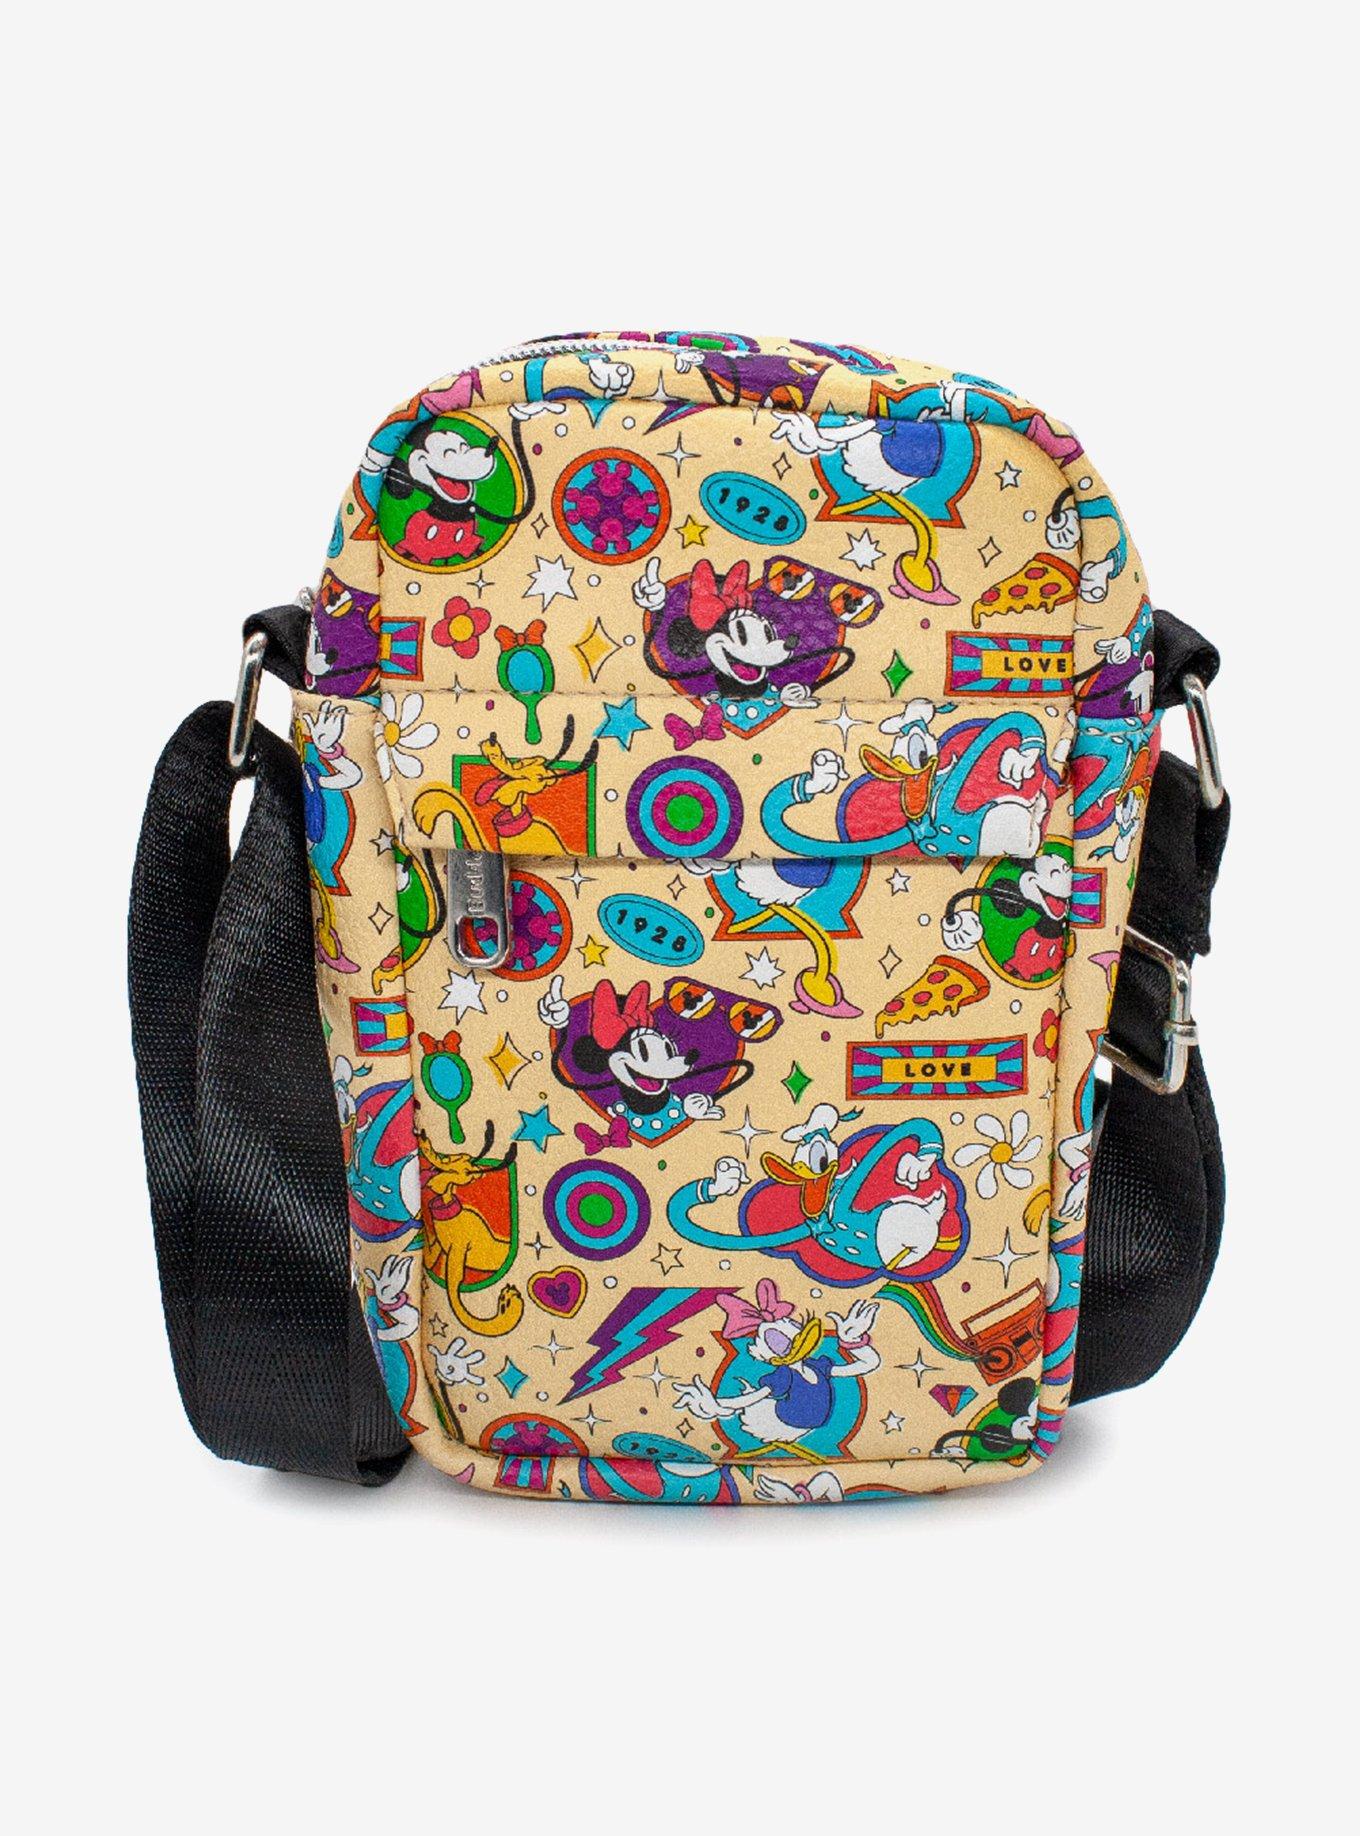 Disney Mickey Mouse and Friends Vegan Leather Crossbody Bag